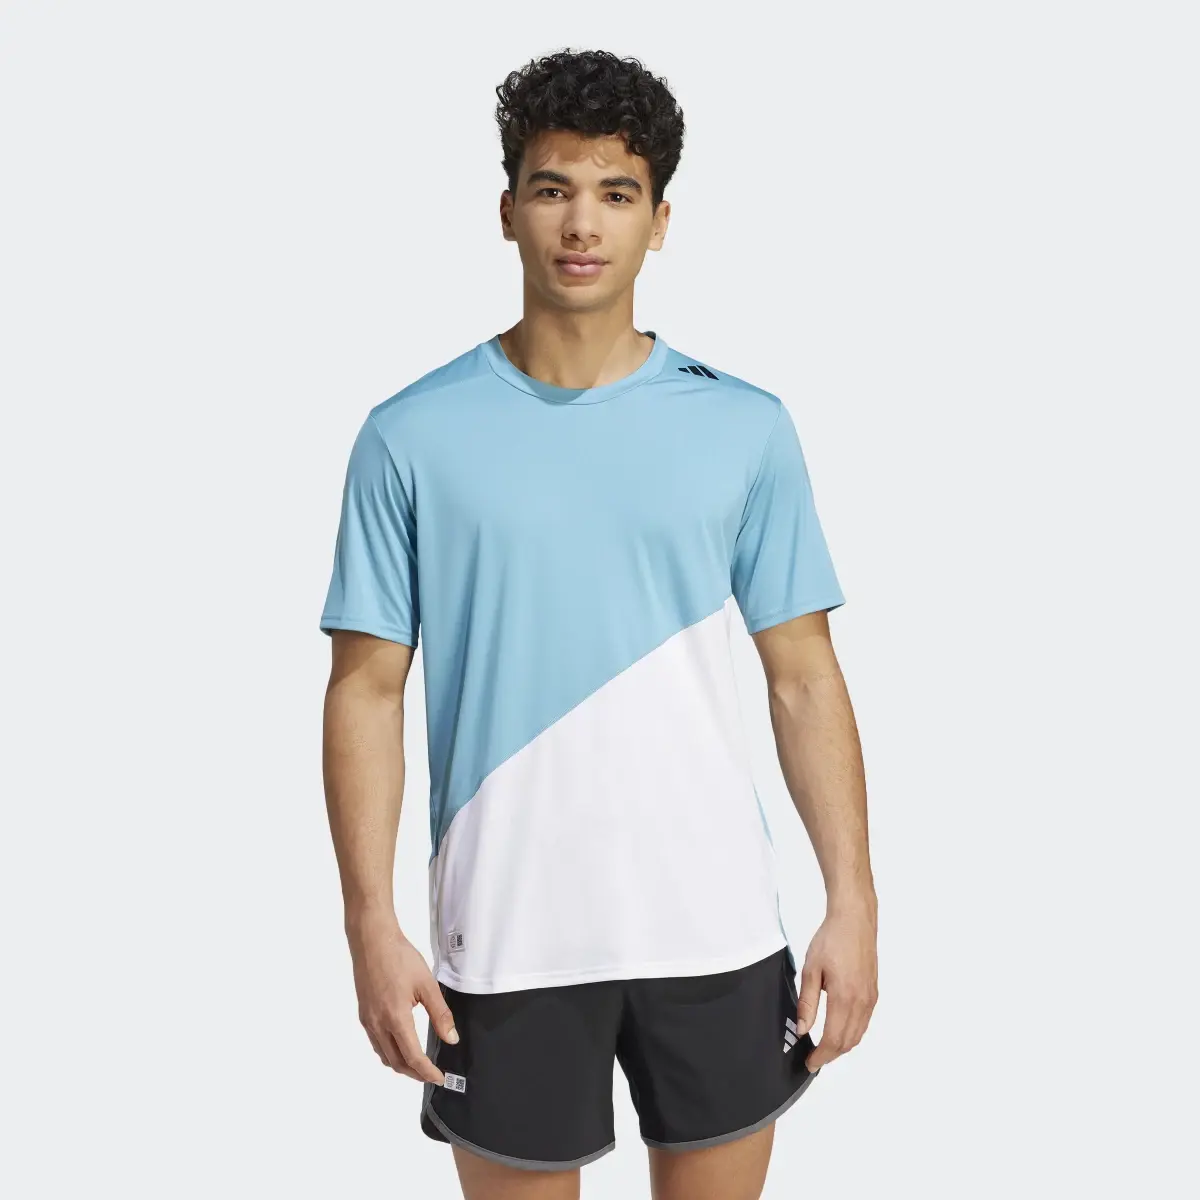 Adidas Made to be Remade Running T-Shirt. 2